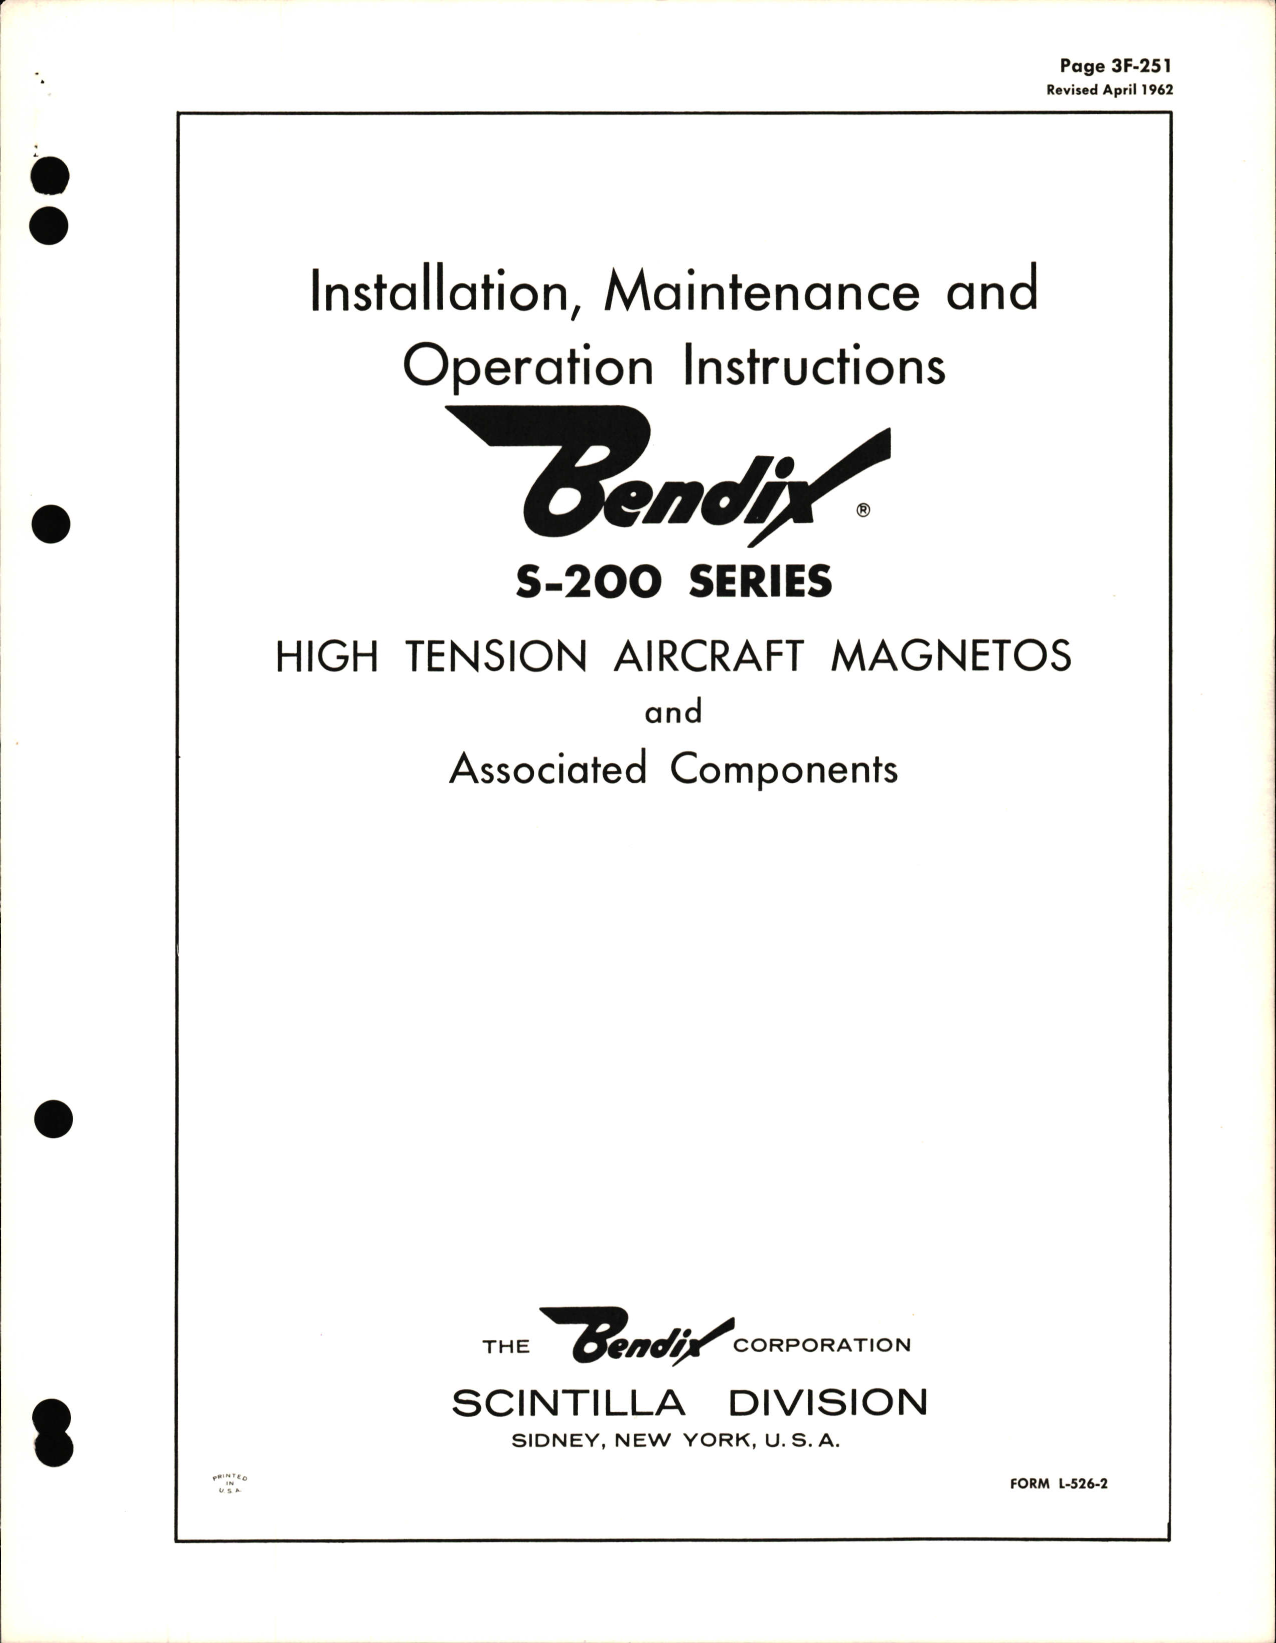 Sample page 1 from AirCorps Library document: Installation, Maintenance, and Operation Instructions for S-200 Series High Tension Aircraft Magnetos and Associated Components